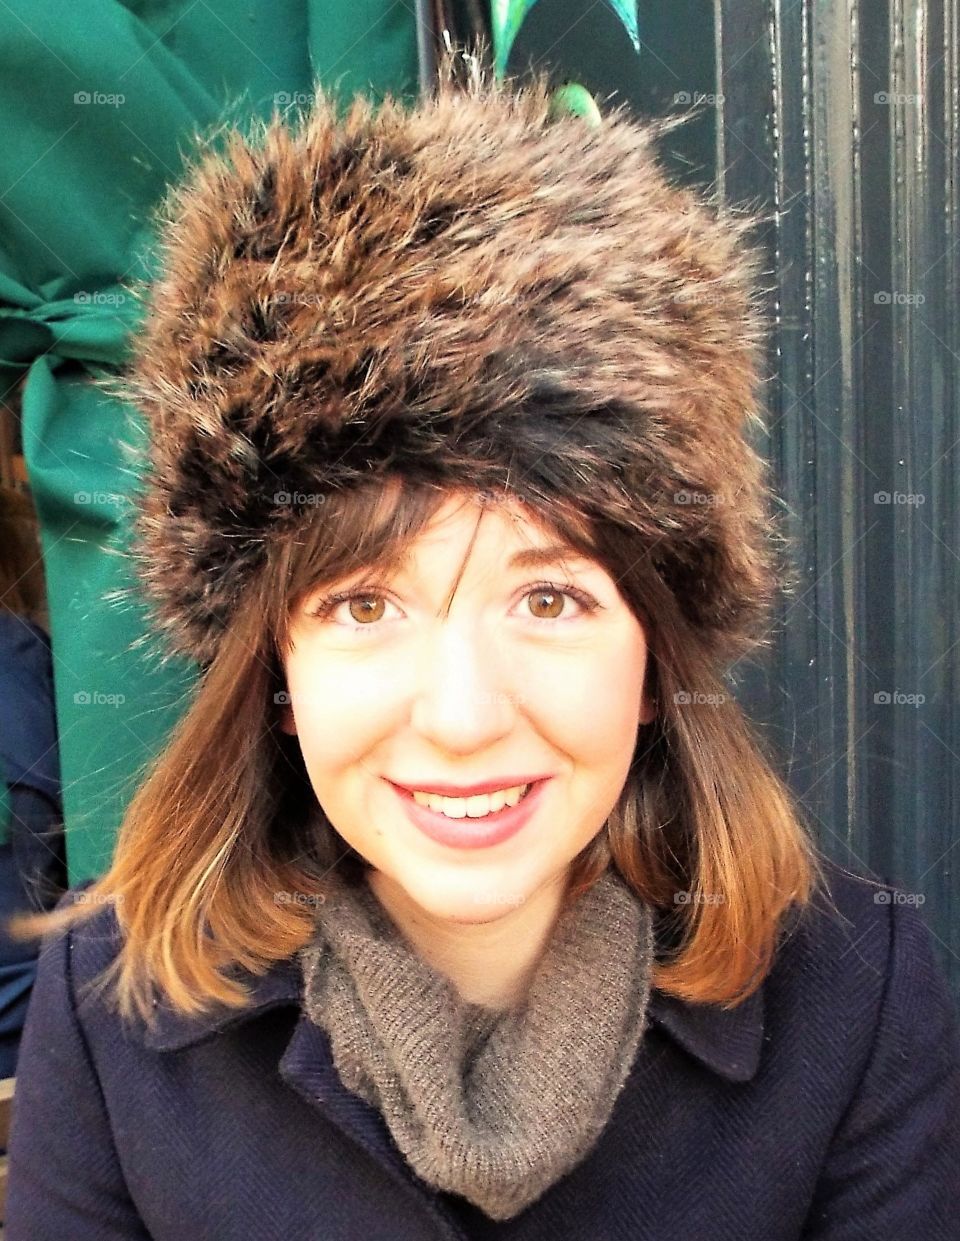 A young Woman wearing a fur hat